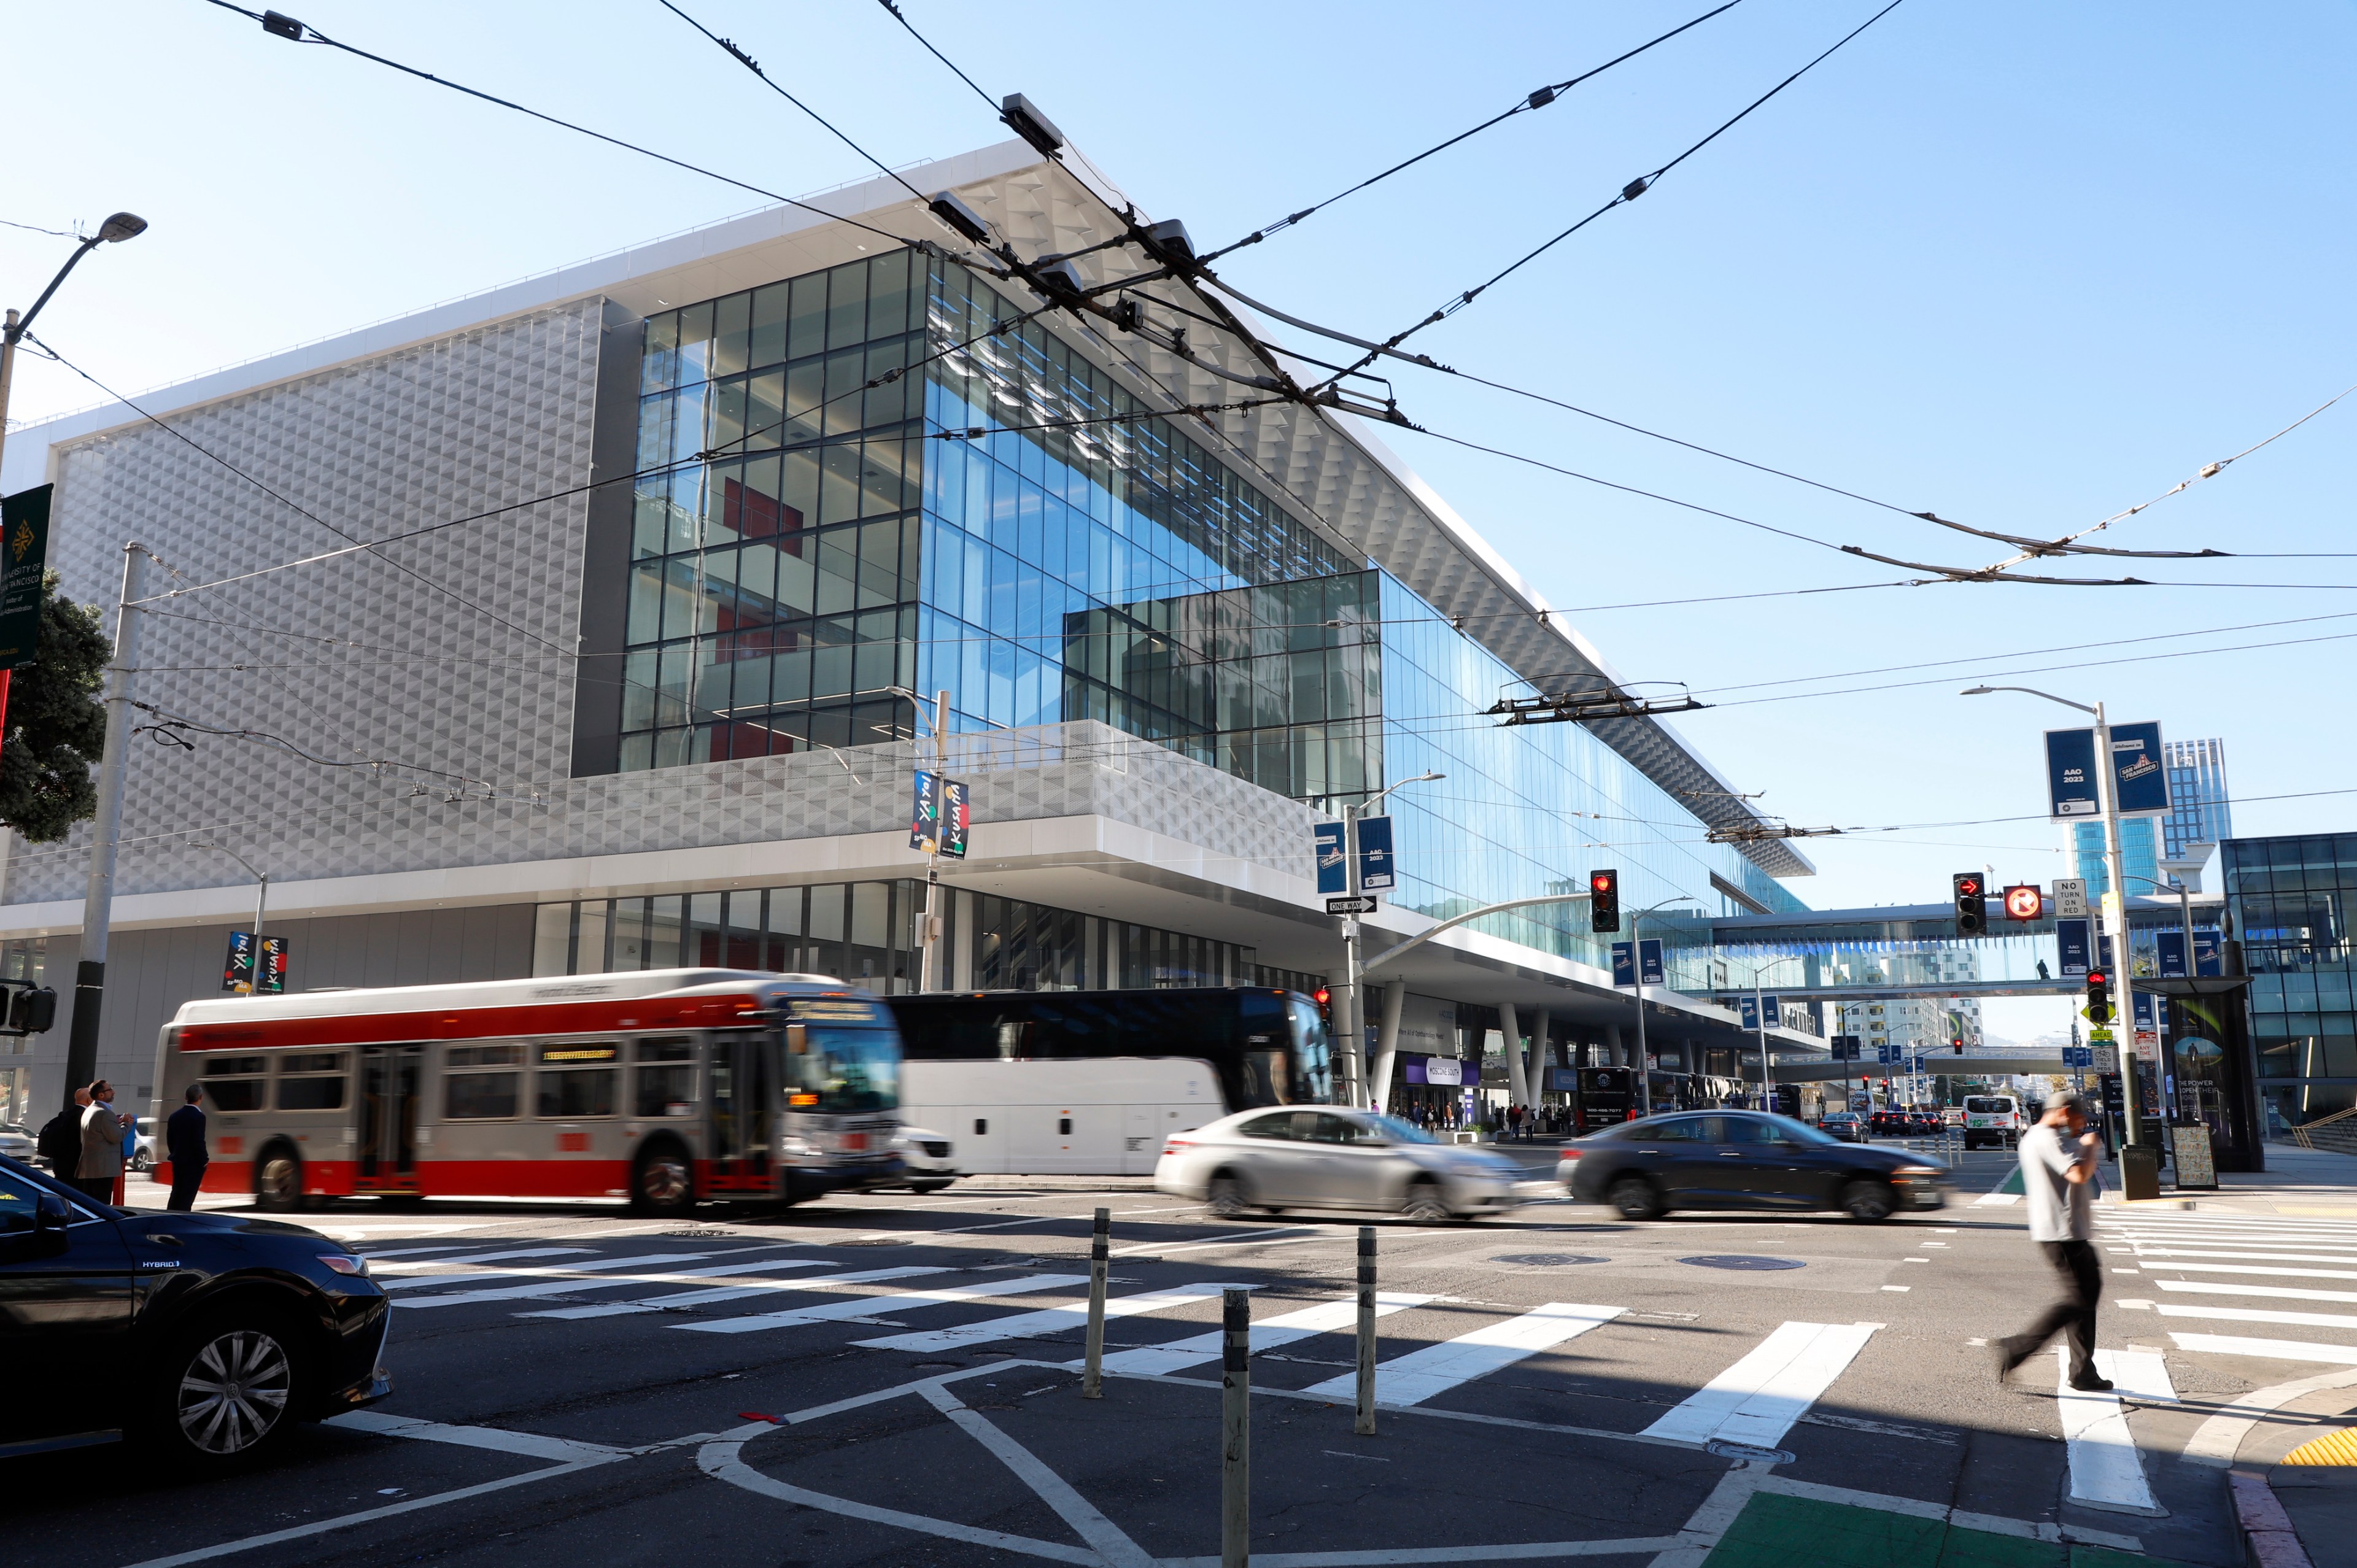 Buses and automobiles speed up 3rd street while pedestrians cross a busy intersection with the glass-enclosed Moscone Center in the background in downtown San Francisco. The area will look less busy when the City implements security ahead of APEC at Moscone Center.